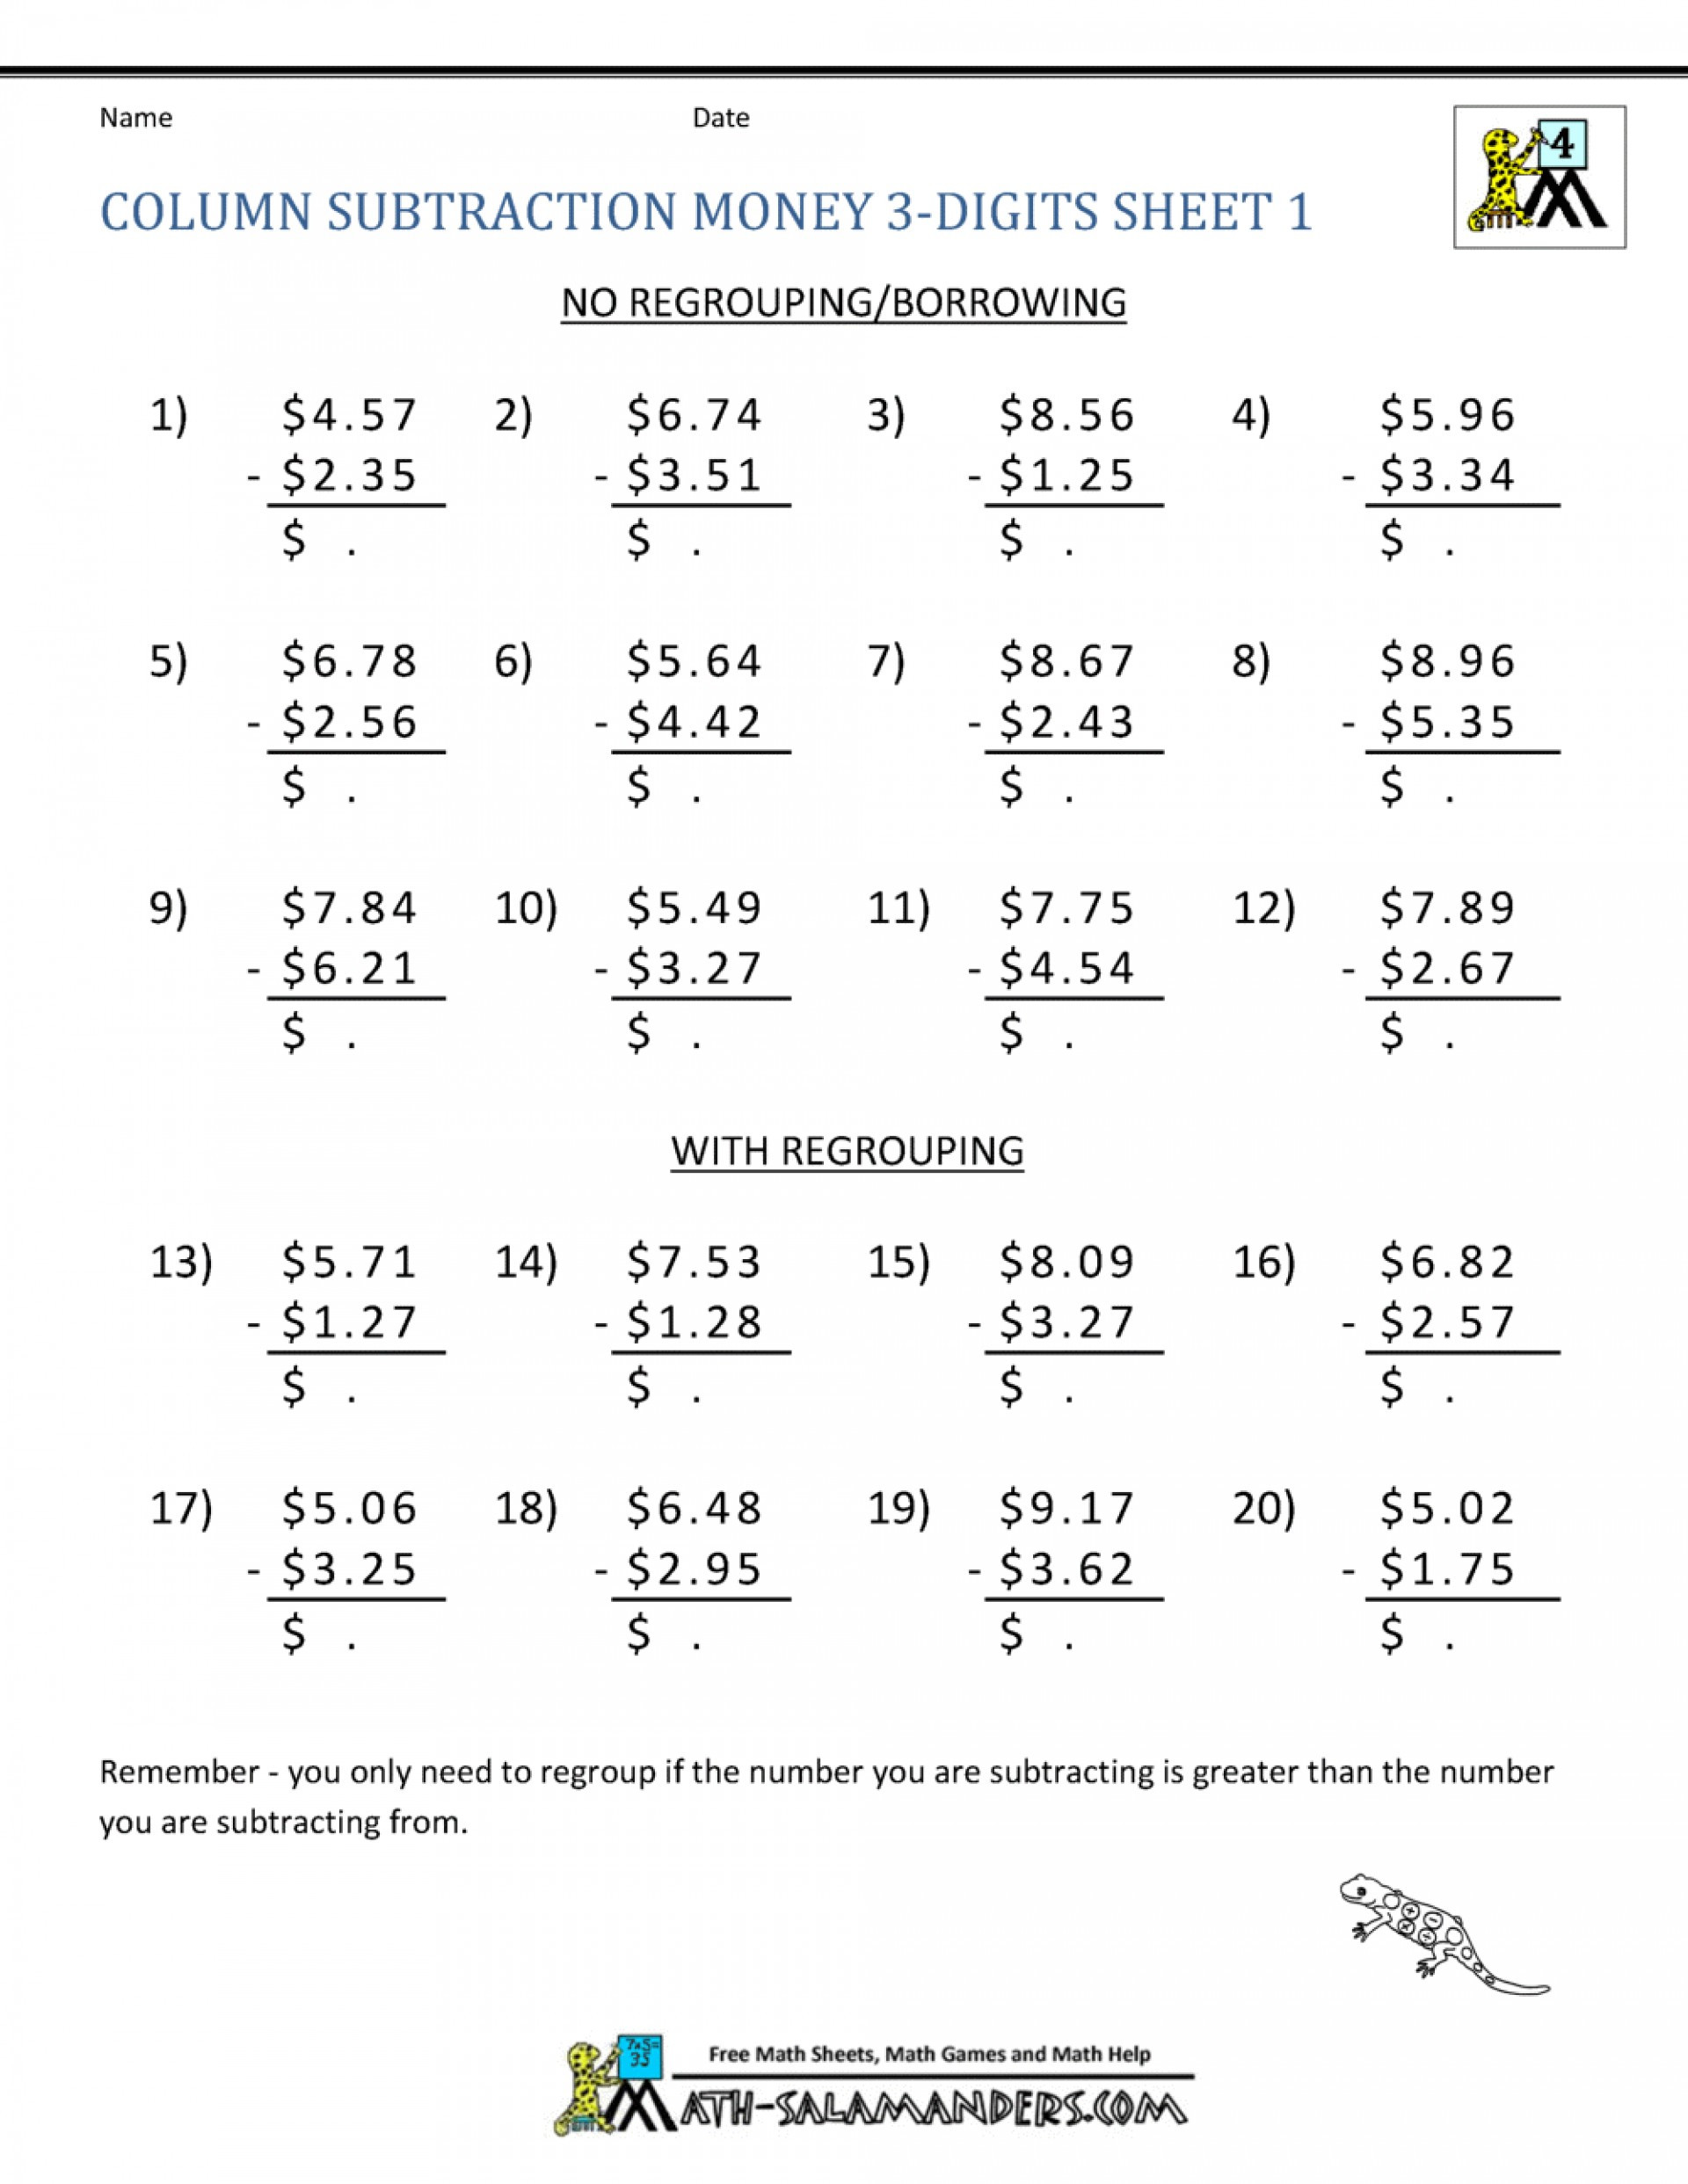 Free Math Worksheets Second Grade 2 Subtraction Subtract whole Tens From 2 Digit Numbers